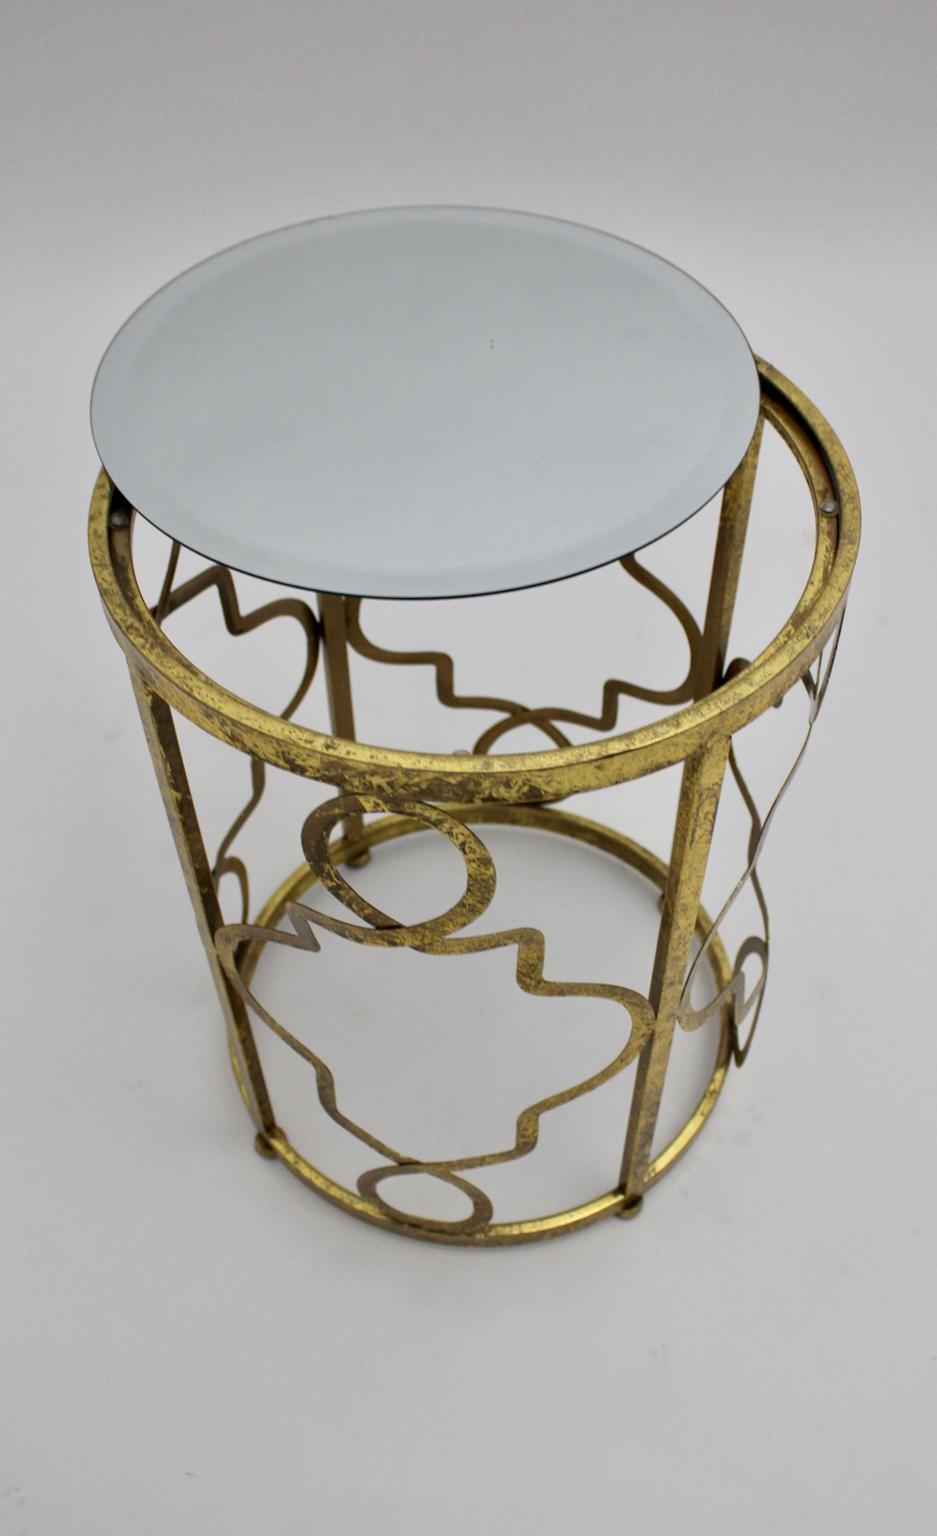 Modern Vintage Sculptural Golden Side Table Column Mirror Glass Top Italy 1980s For Sale 1